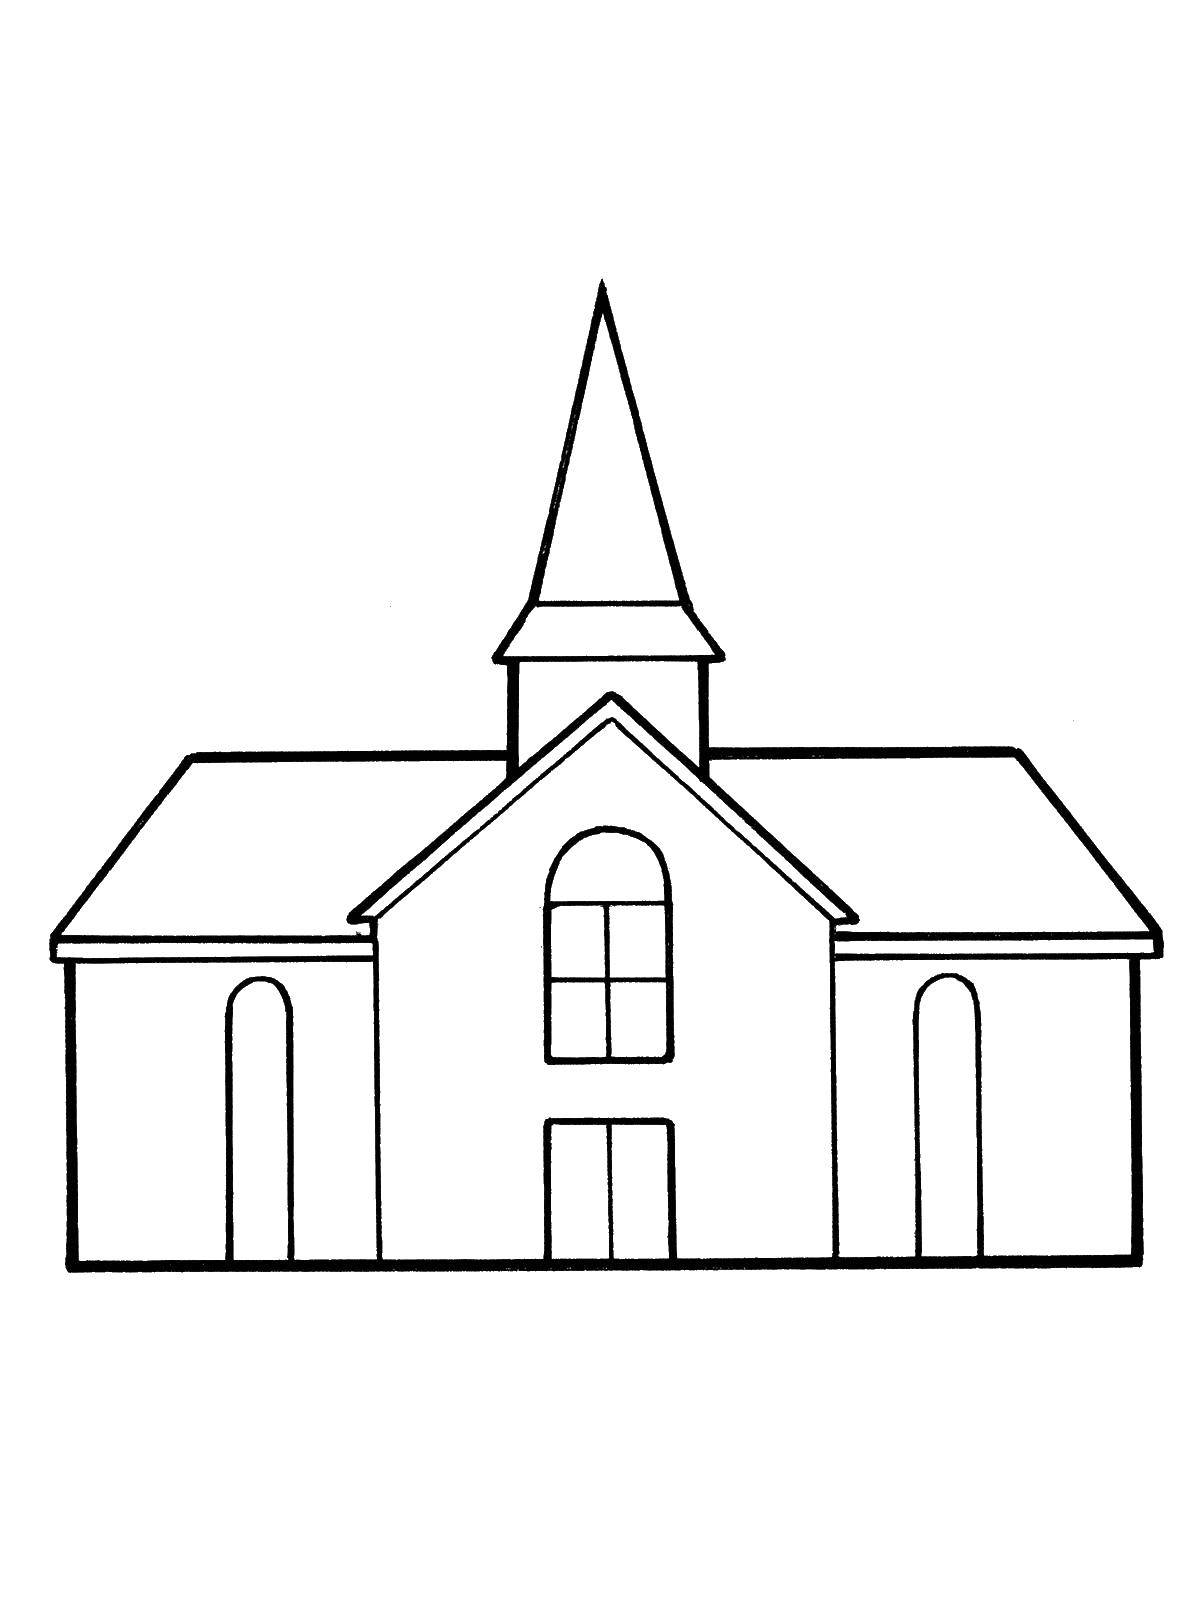 Coloring House Church. Category The contours of houses. Tags:  Church, home.